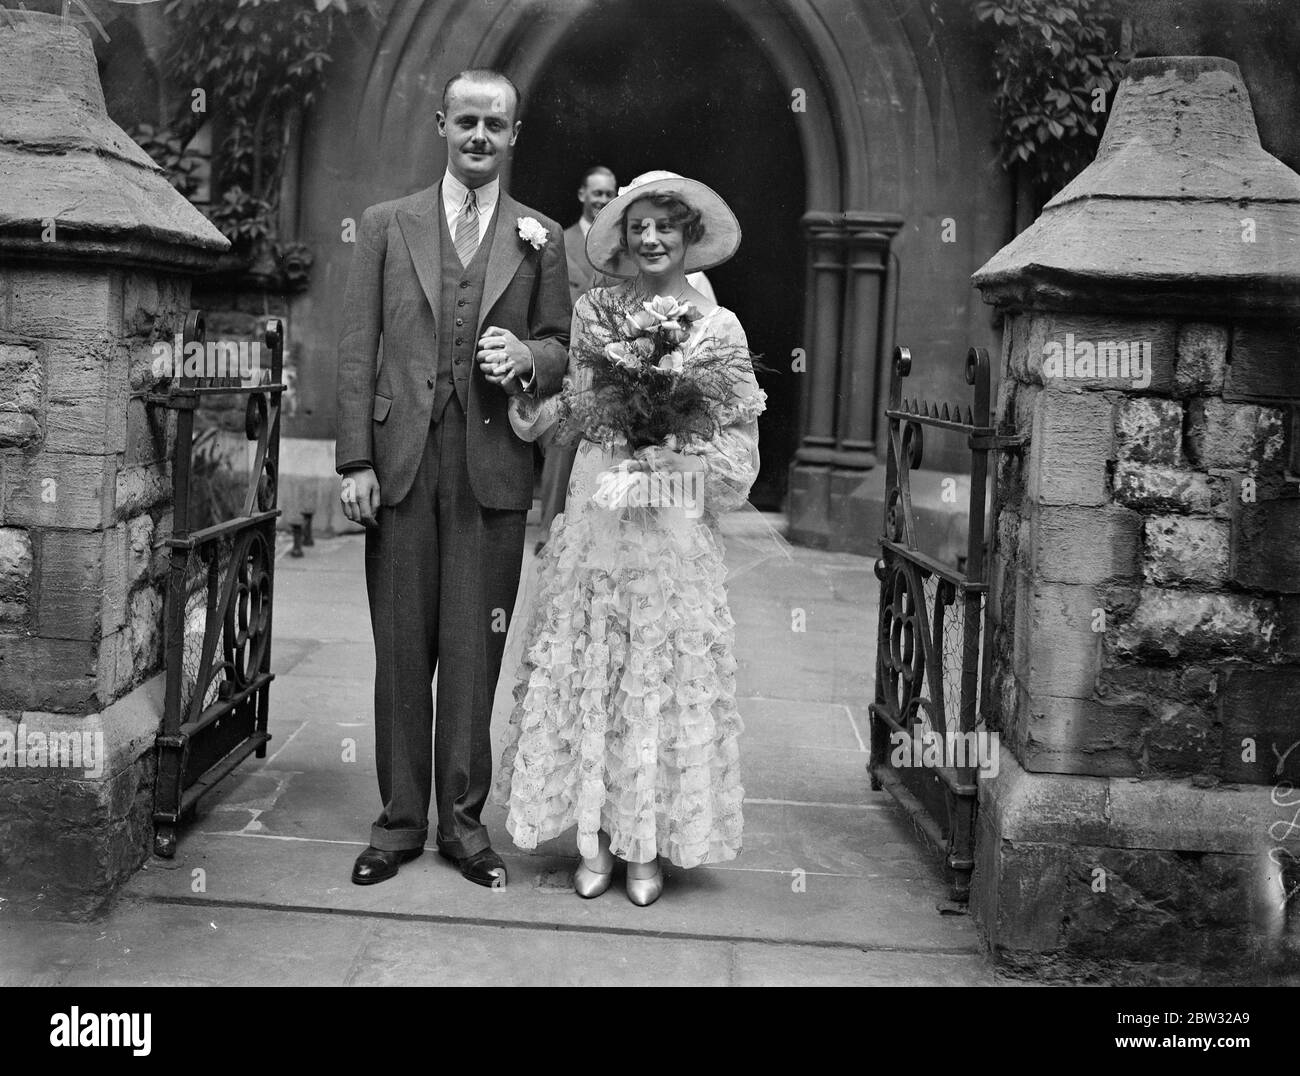 Viscount ' s son weds his cousin . The wedding of the Hon Byron Carey , second son of Viscount and Viscountess Falkland , to his third cousin , Miss Daphne Helen King , took place quietly at St Judes Church , Courtfield Gardens , London . The bride and groom after the ceremony . 13 June 1932 Stock Photo